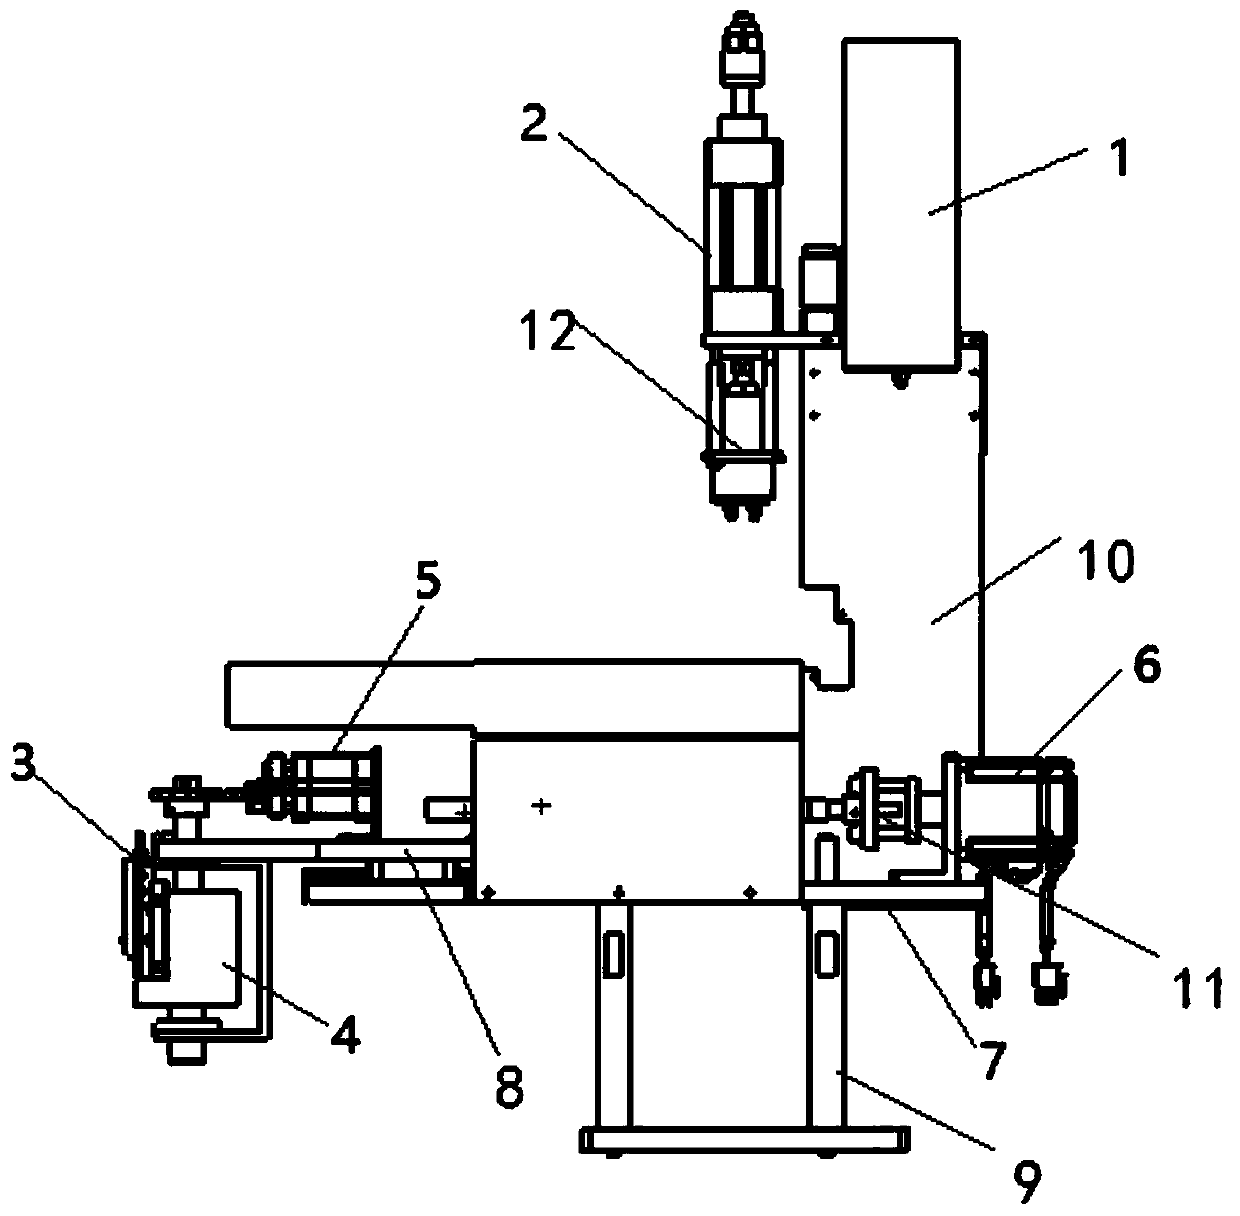 Automatic adhesive removing device